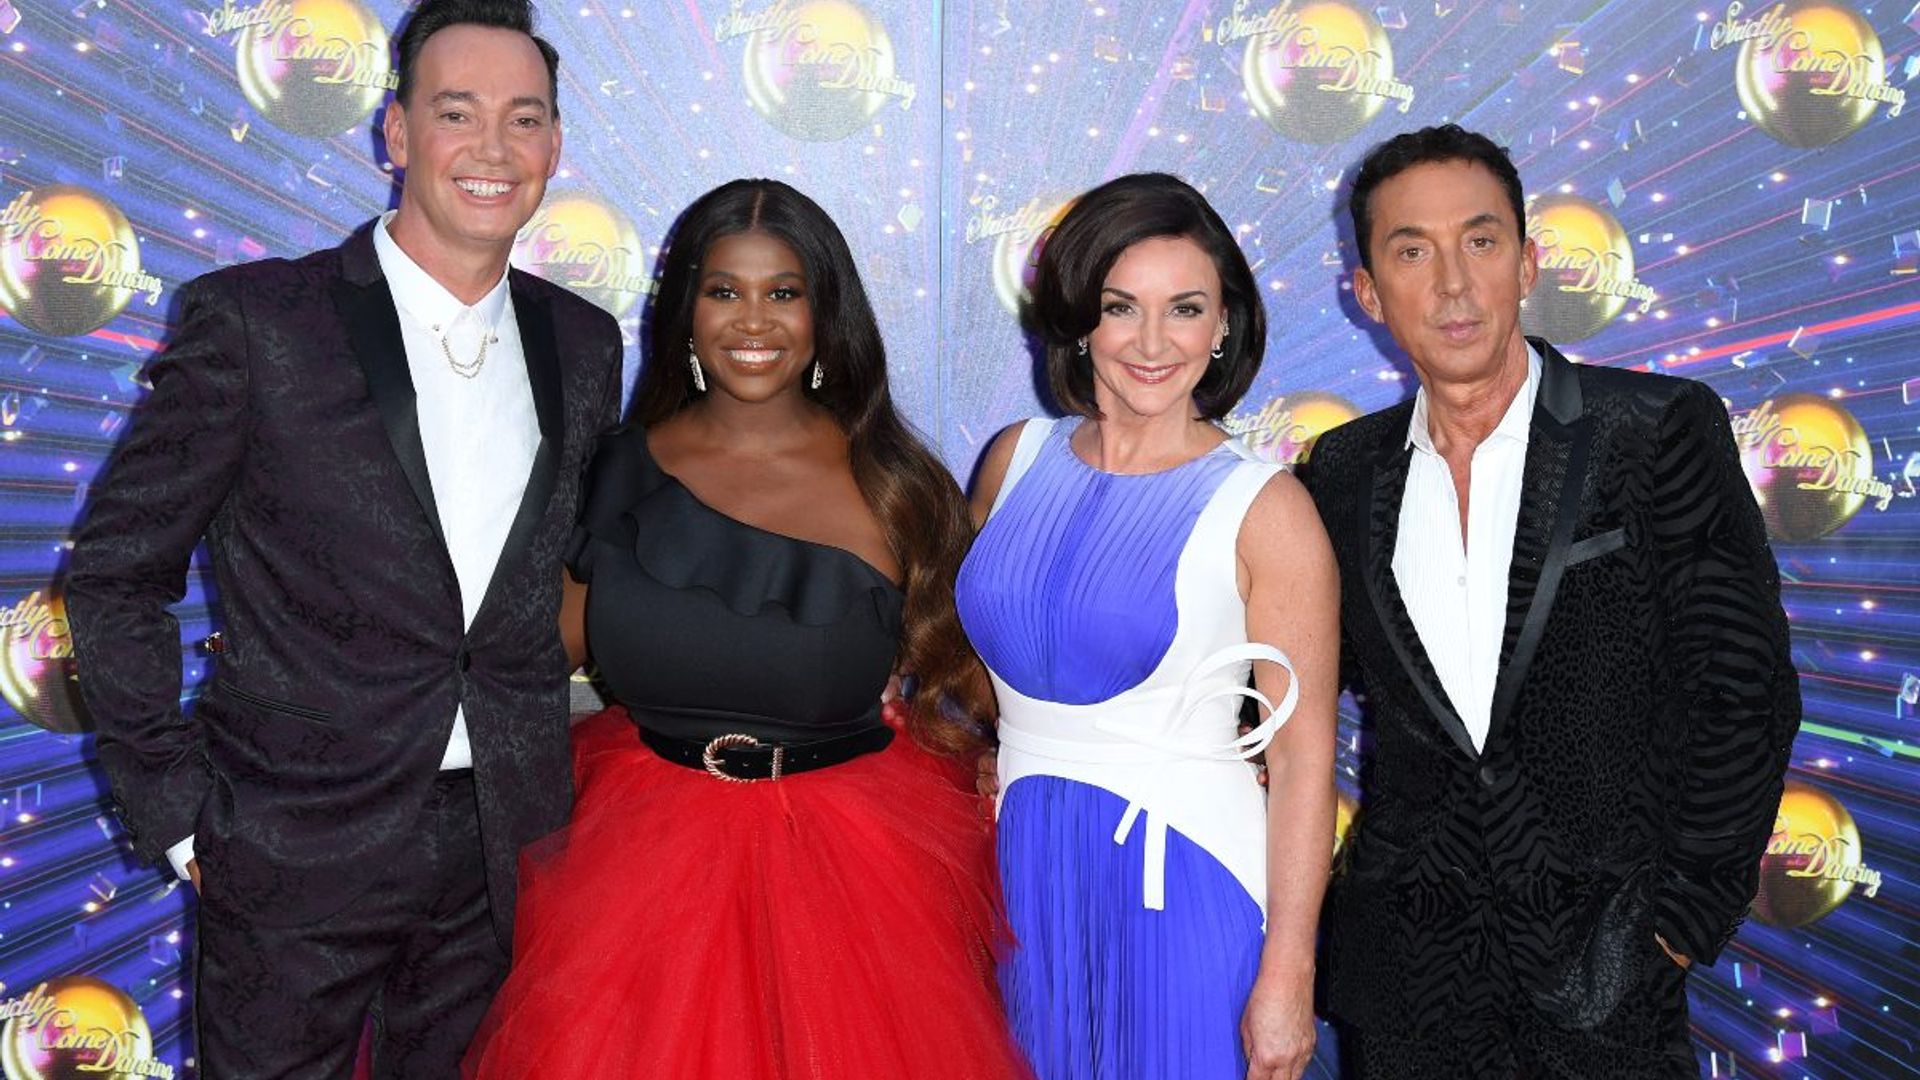 Who will replace Bruno Tonioli on Strictly Come Dancing?